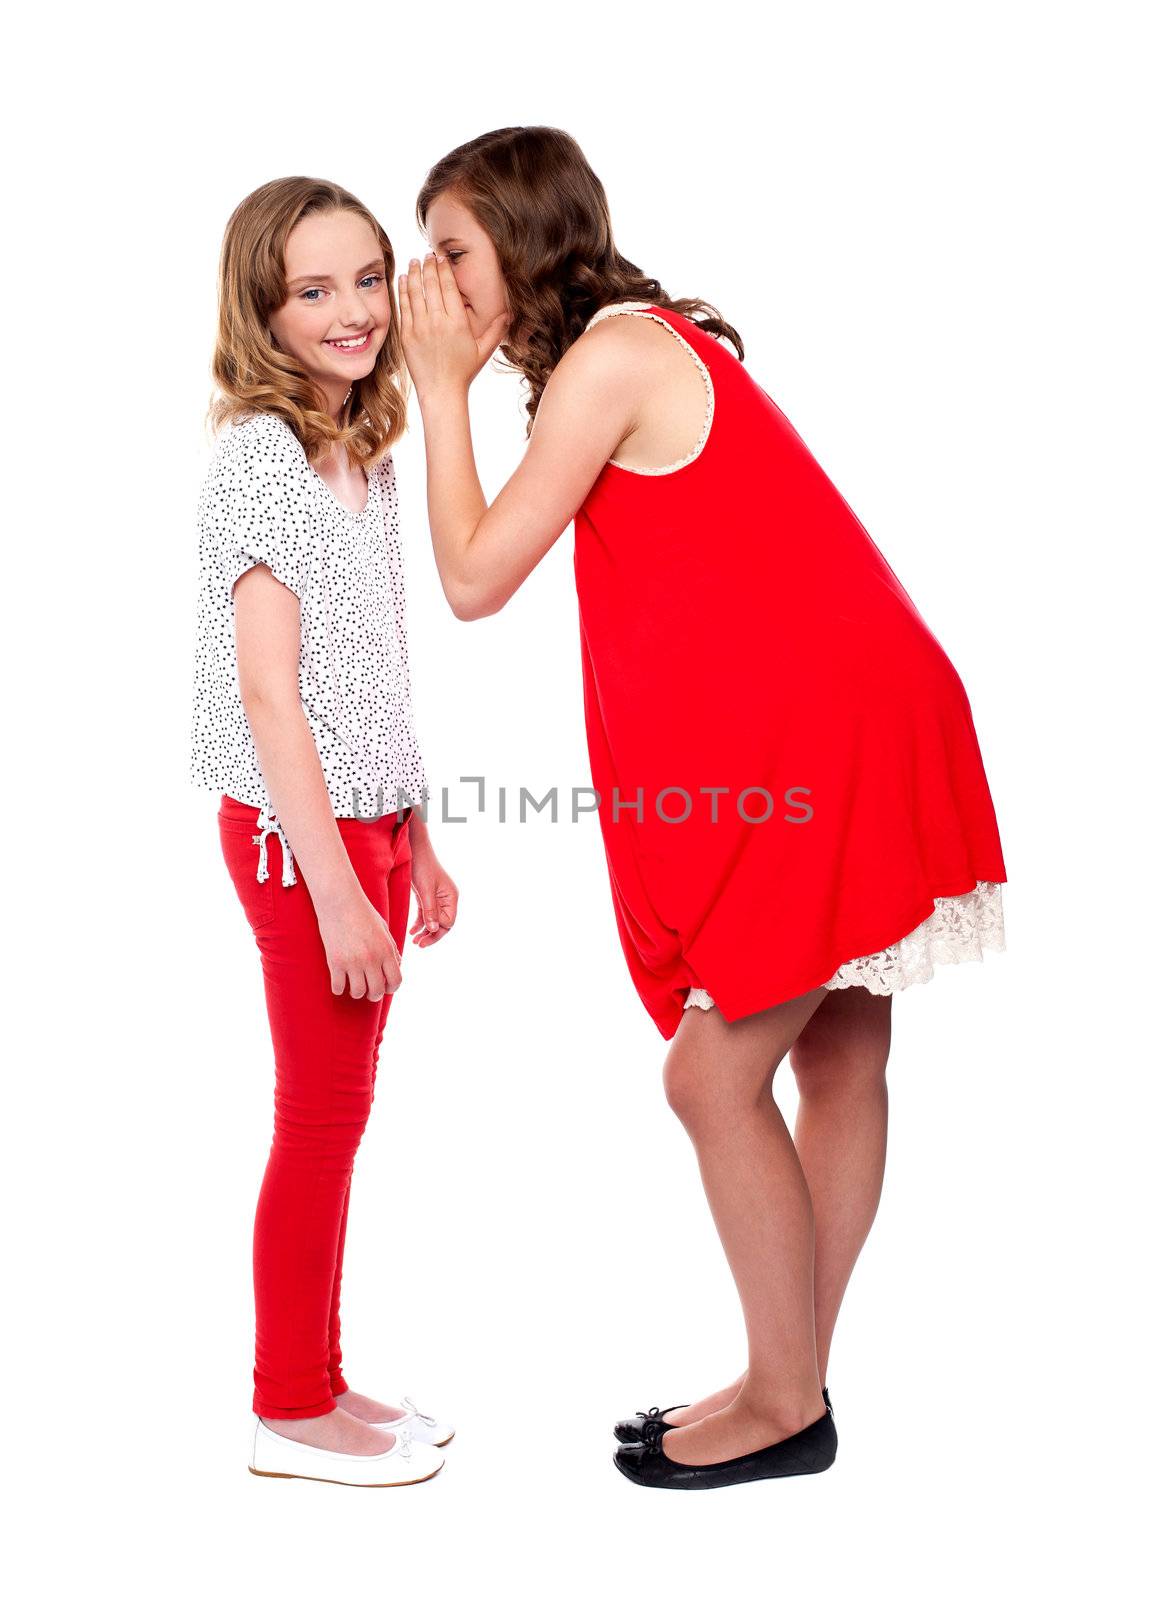 Girl whispering a secret into her friends ear. All on white background